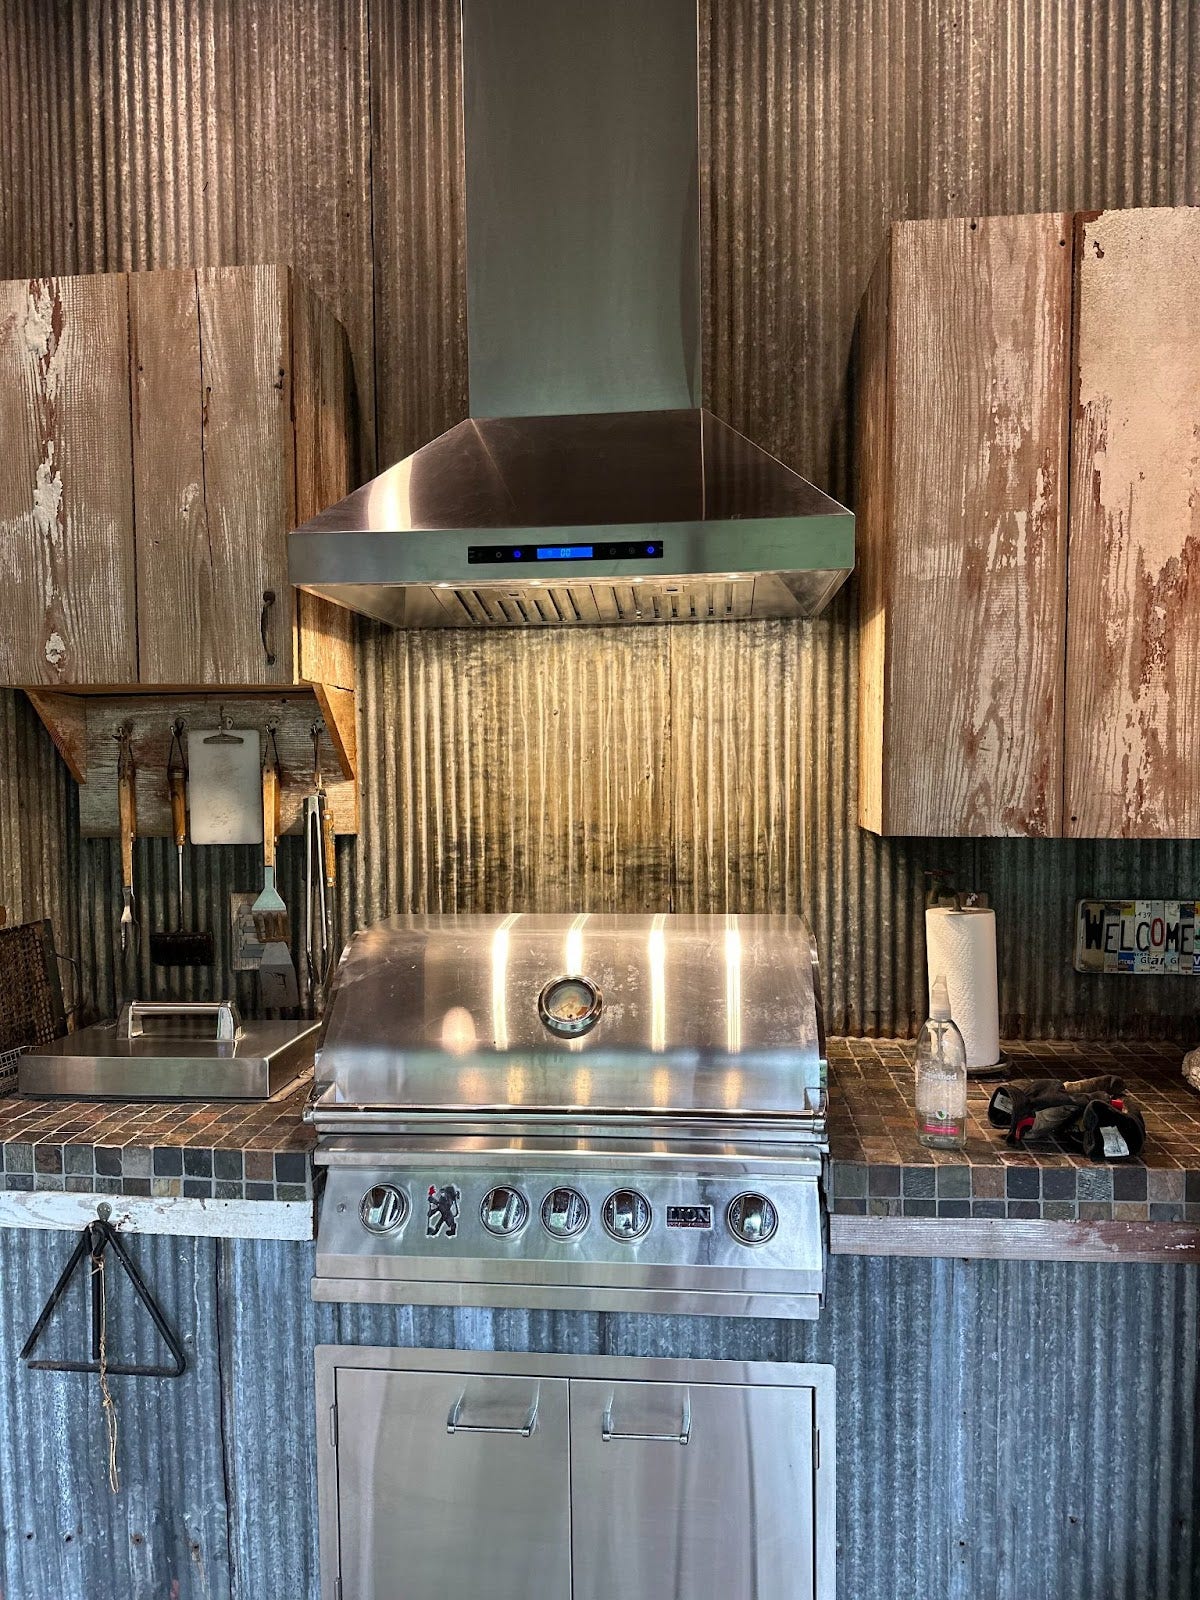 Industrial-style outdoor kitchen with stainless steel grill and range hood, against a distressed wooden and corrugated metal backdrop. - Proline Range Hoods - prolinerangehoods.com 